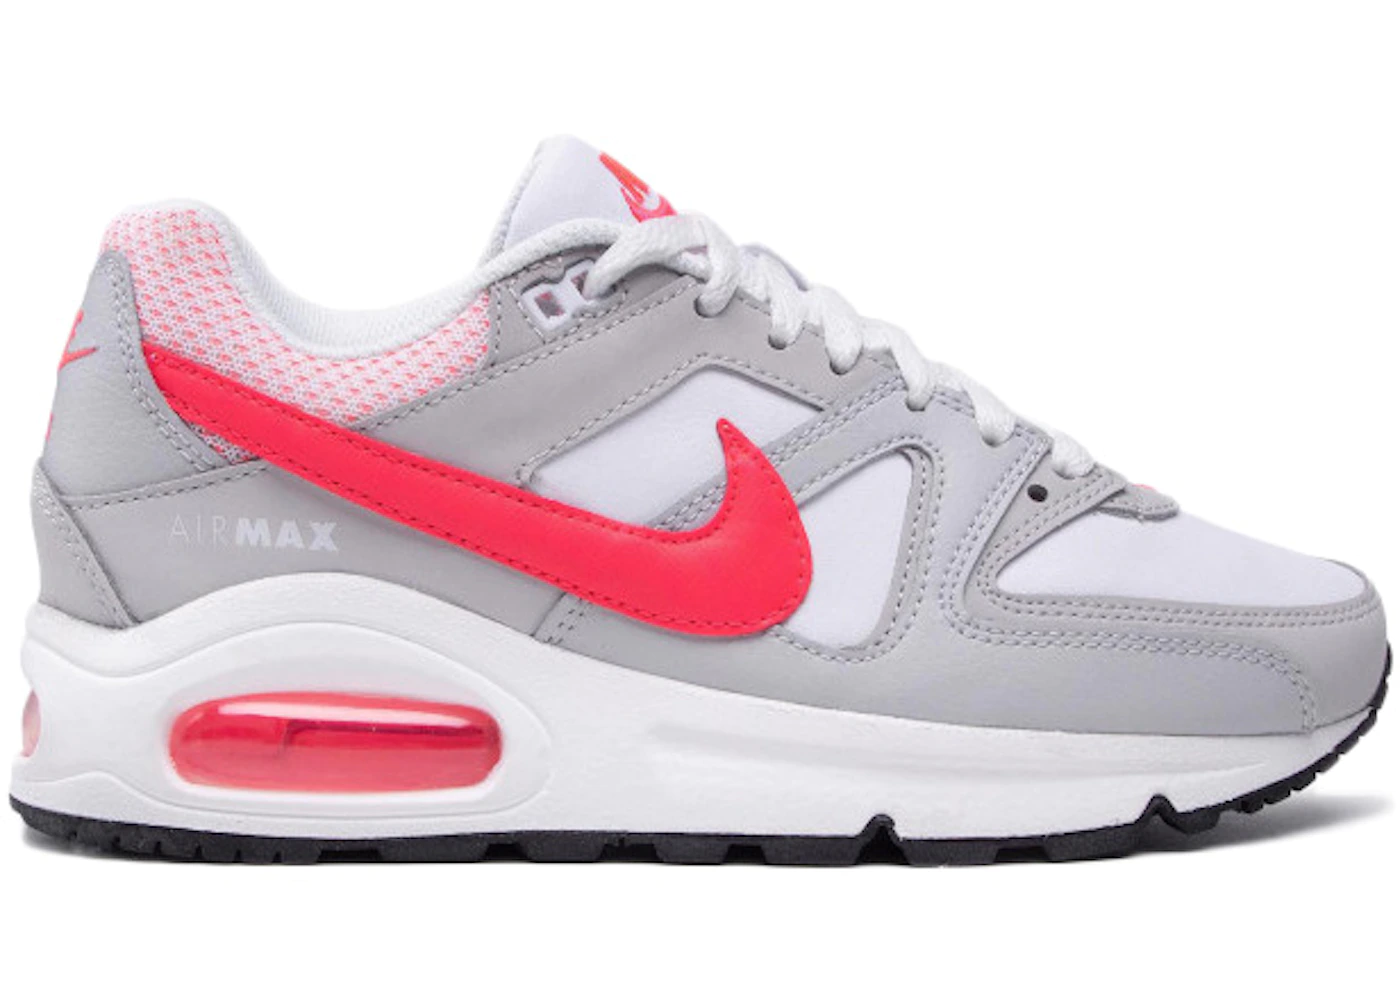 sexual deseo Introducir Nike Air Max Command Hyper Punch (Women's) - 397690-169 - US